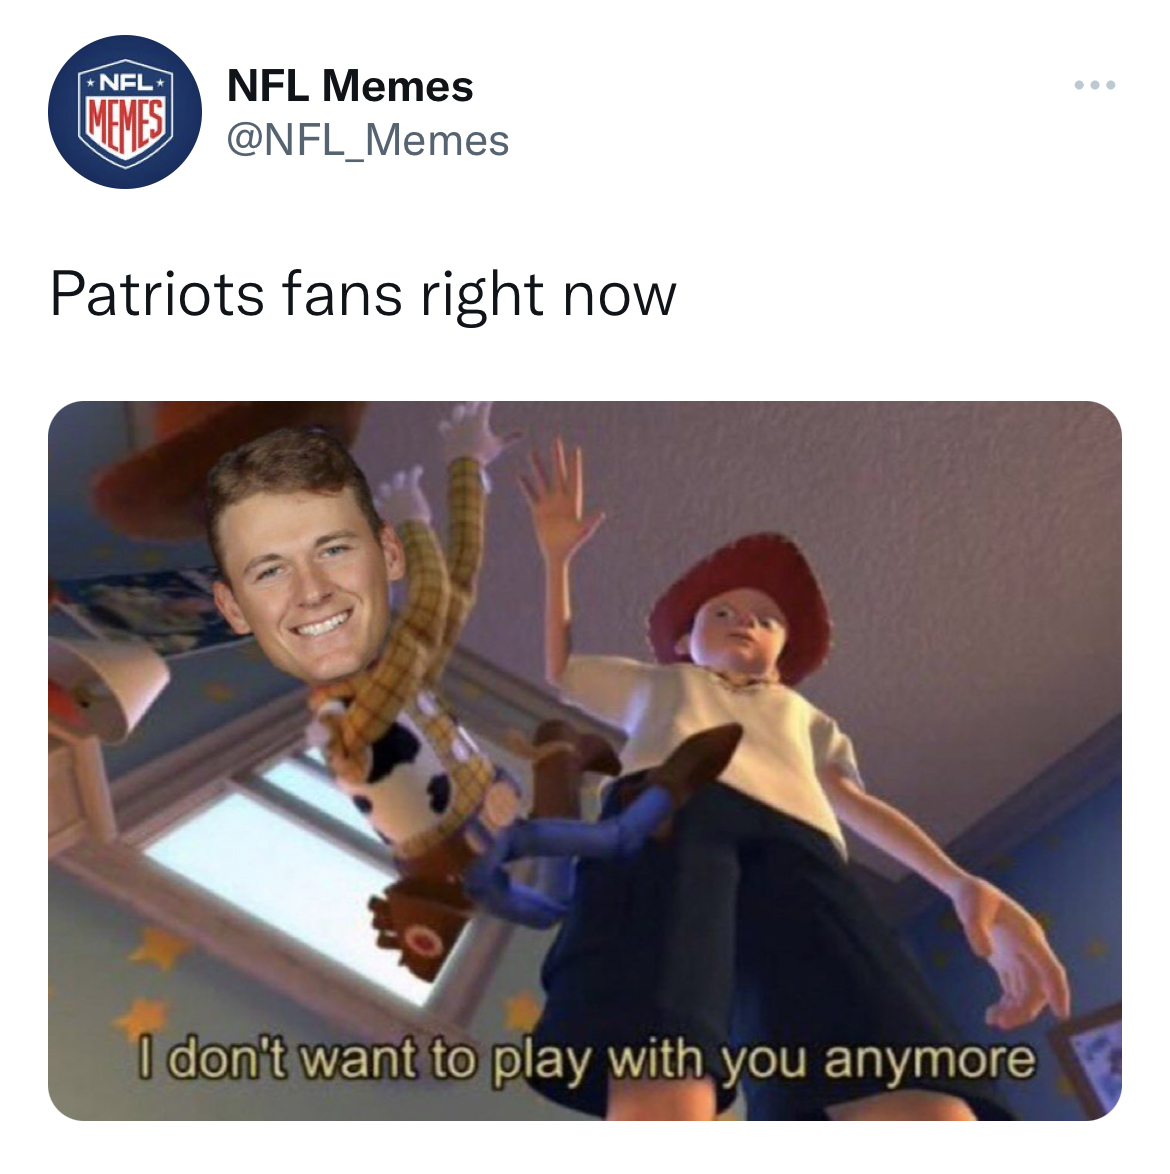 Tweets dunking on celebs - human behavior - Nfl Nfl Memes Memes Patriots fans right now I don't want to play with you anymore www